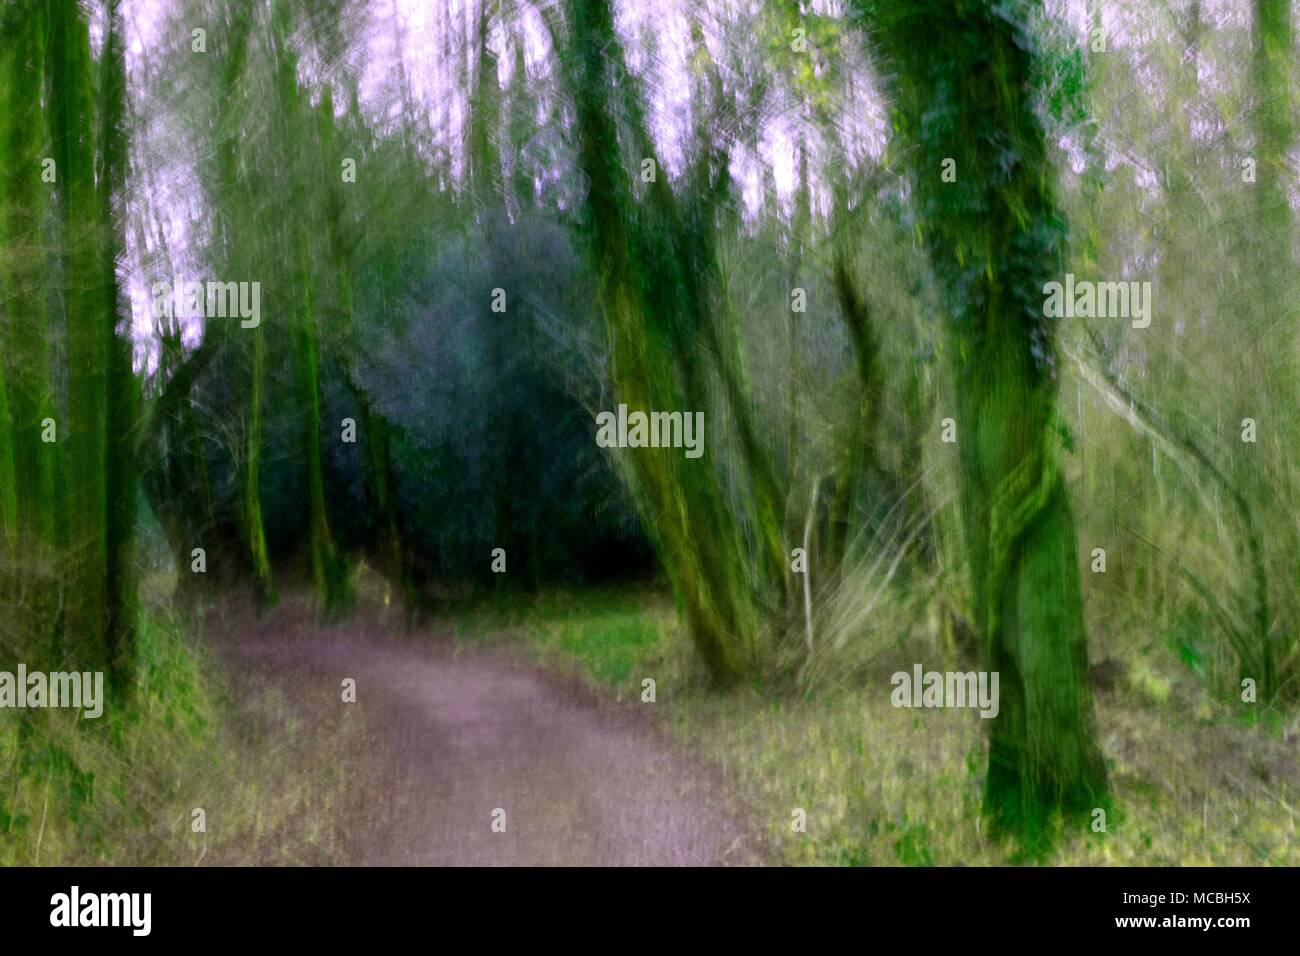 Abstract forest path background with blurry green trees, purple sky and creeping ivy. Stock Photo